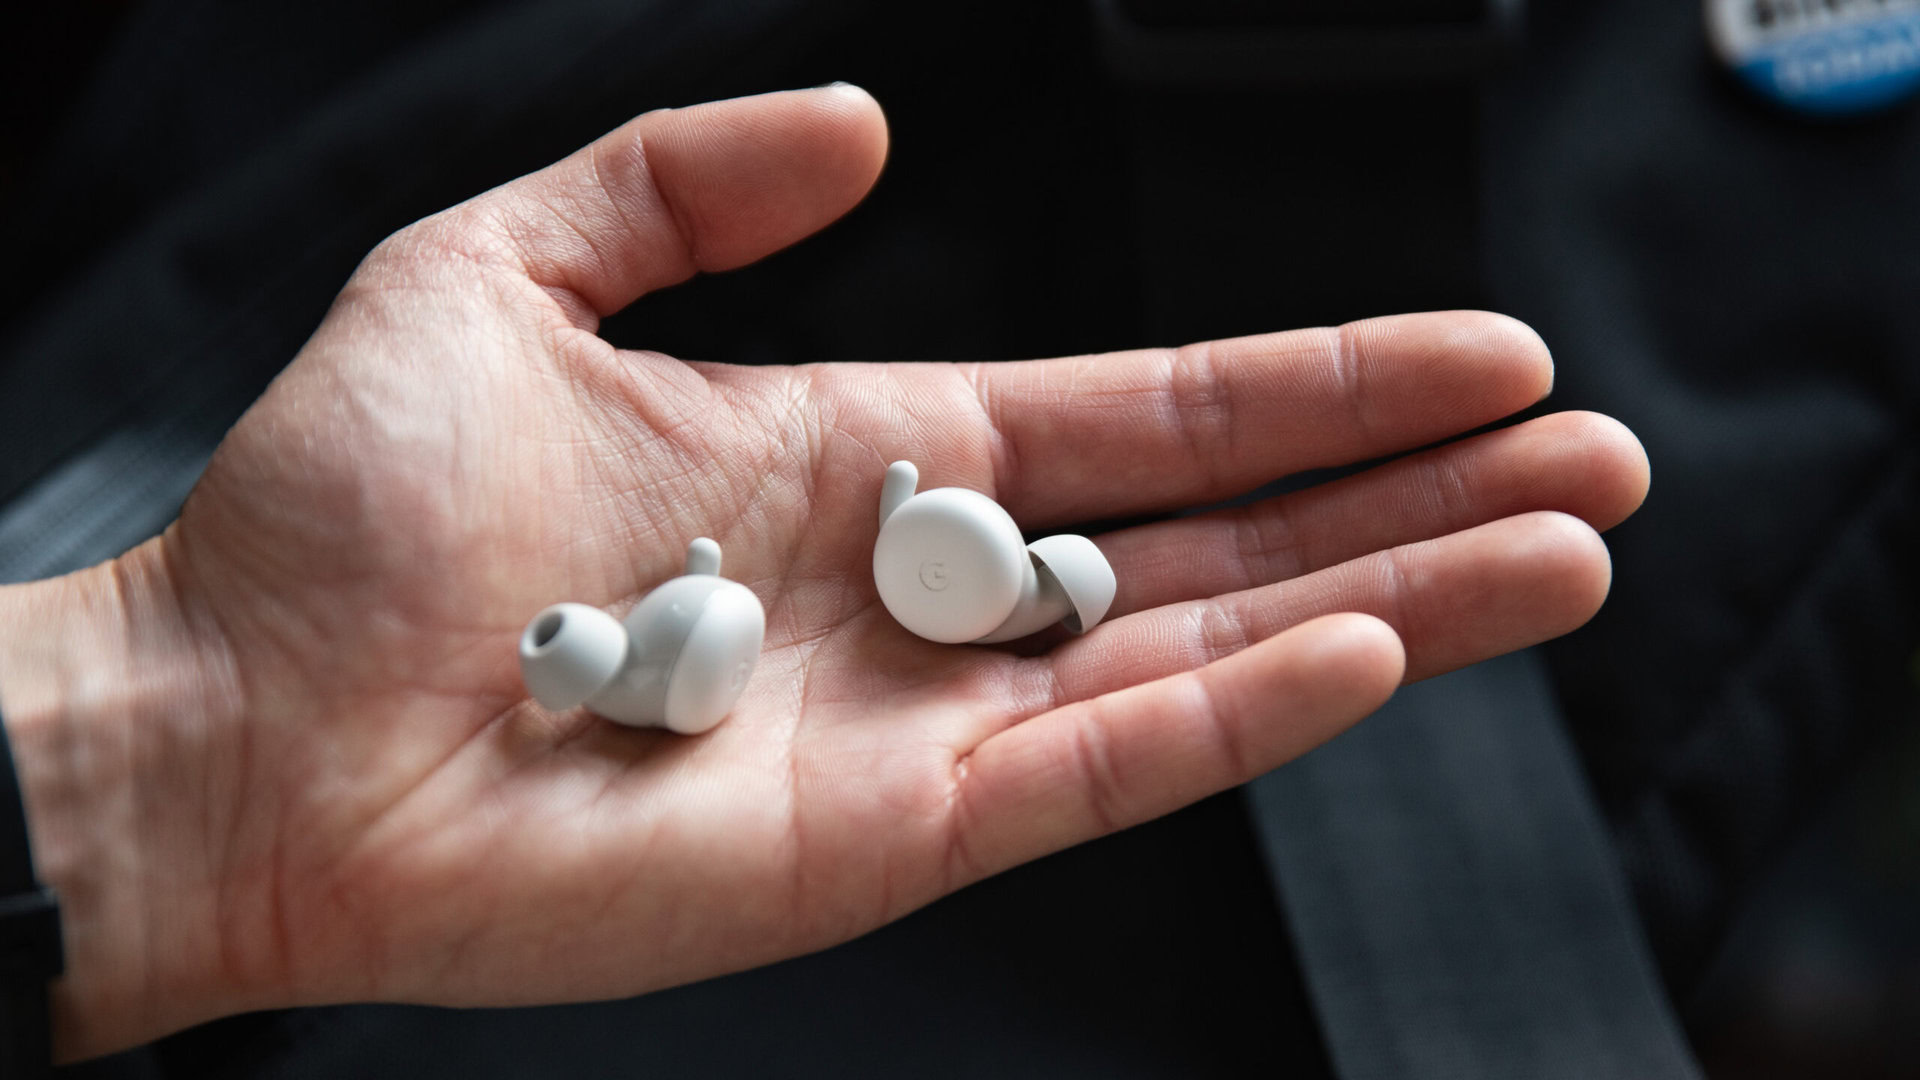 Google Pixel Buds A-Series review: Simple, affordable buds for Android